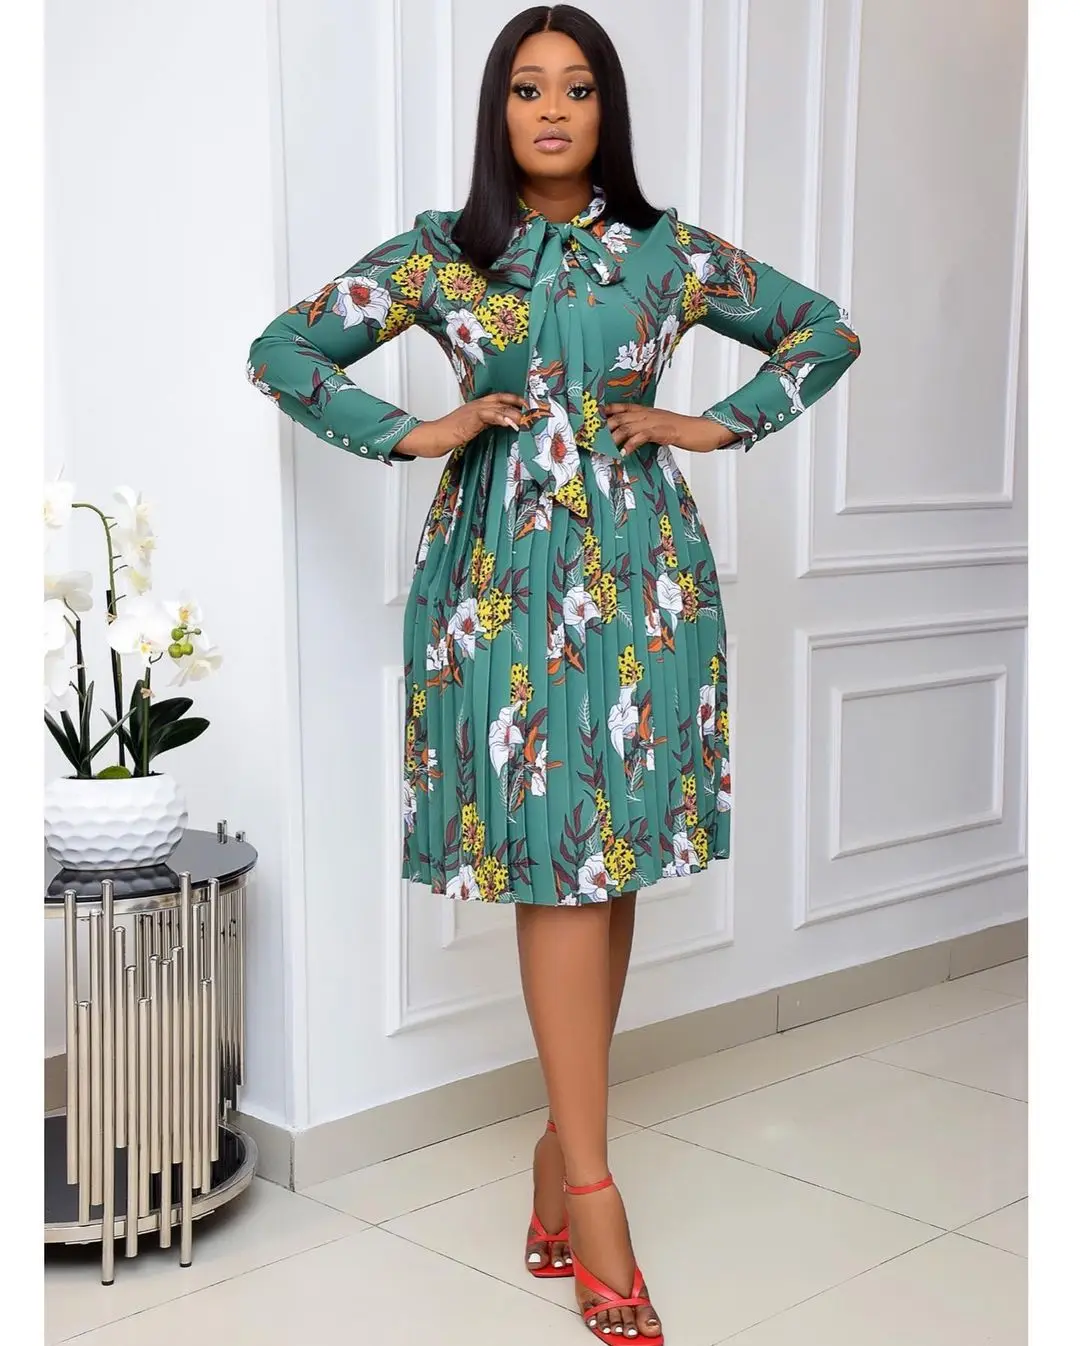 

WW-0628 African Women's Printed Long-sleeve Big Yards Dress African Print Women Long Sleeve Ladies Clothes Dresses, As your request